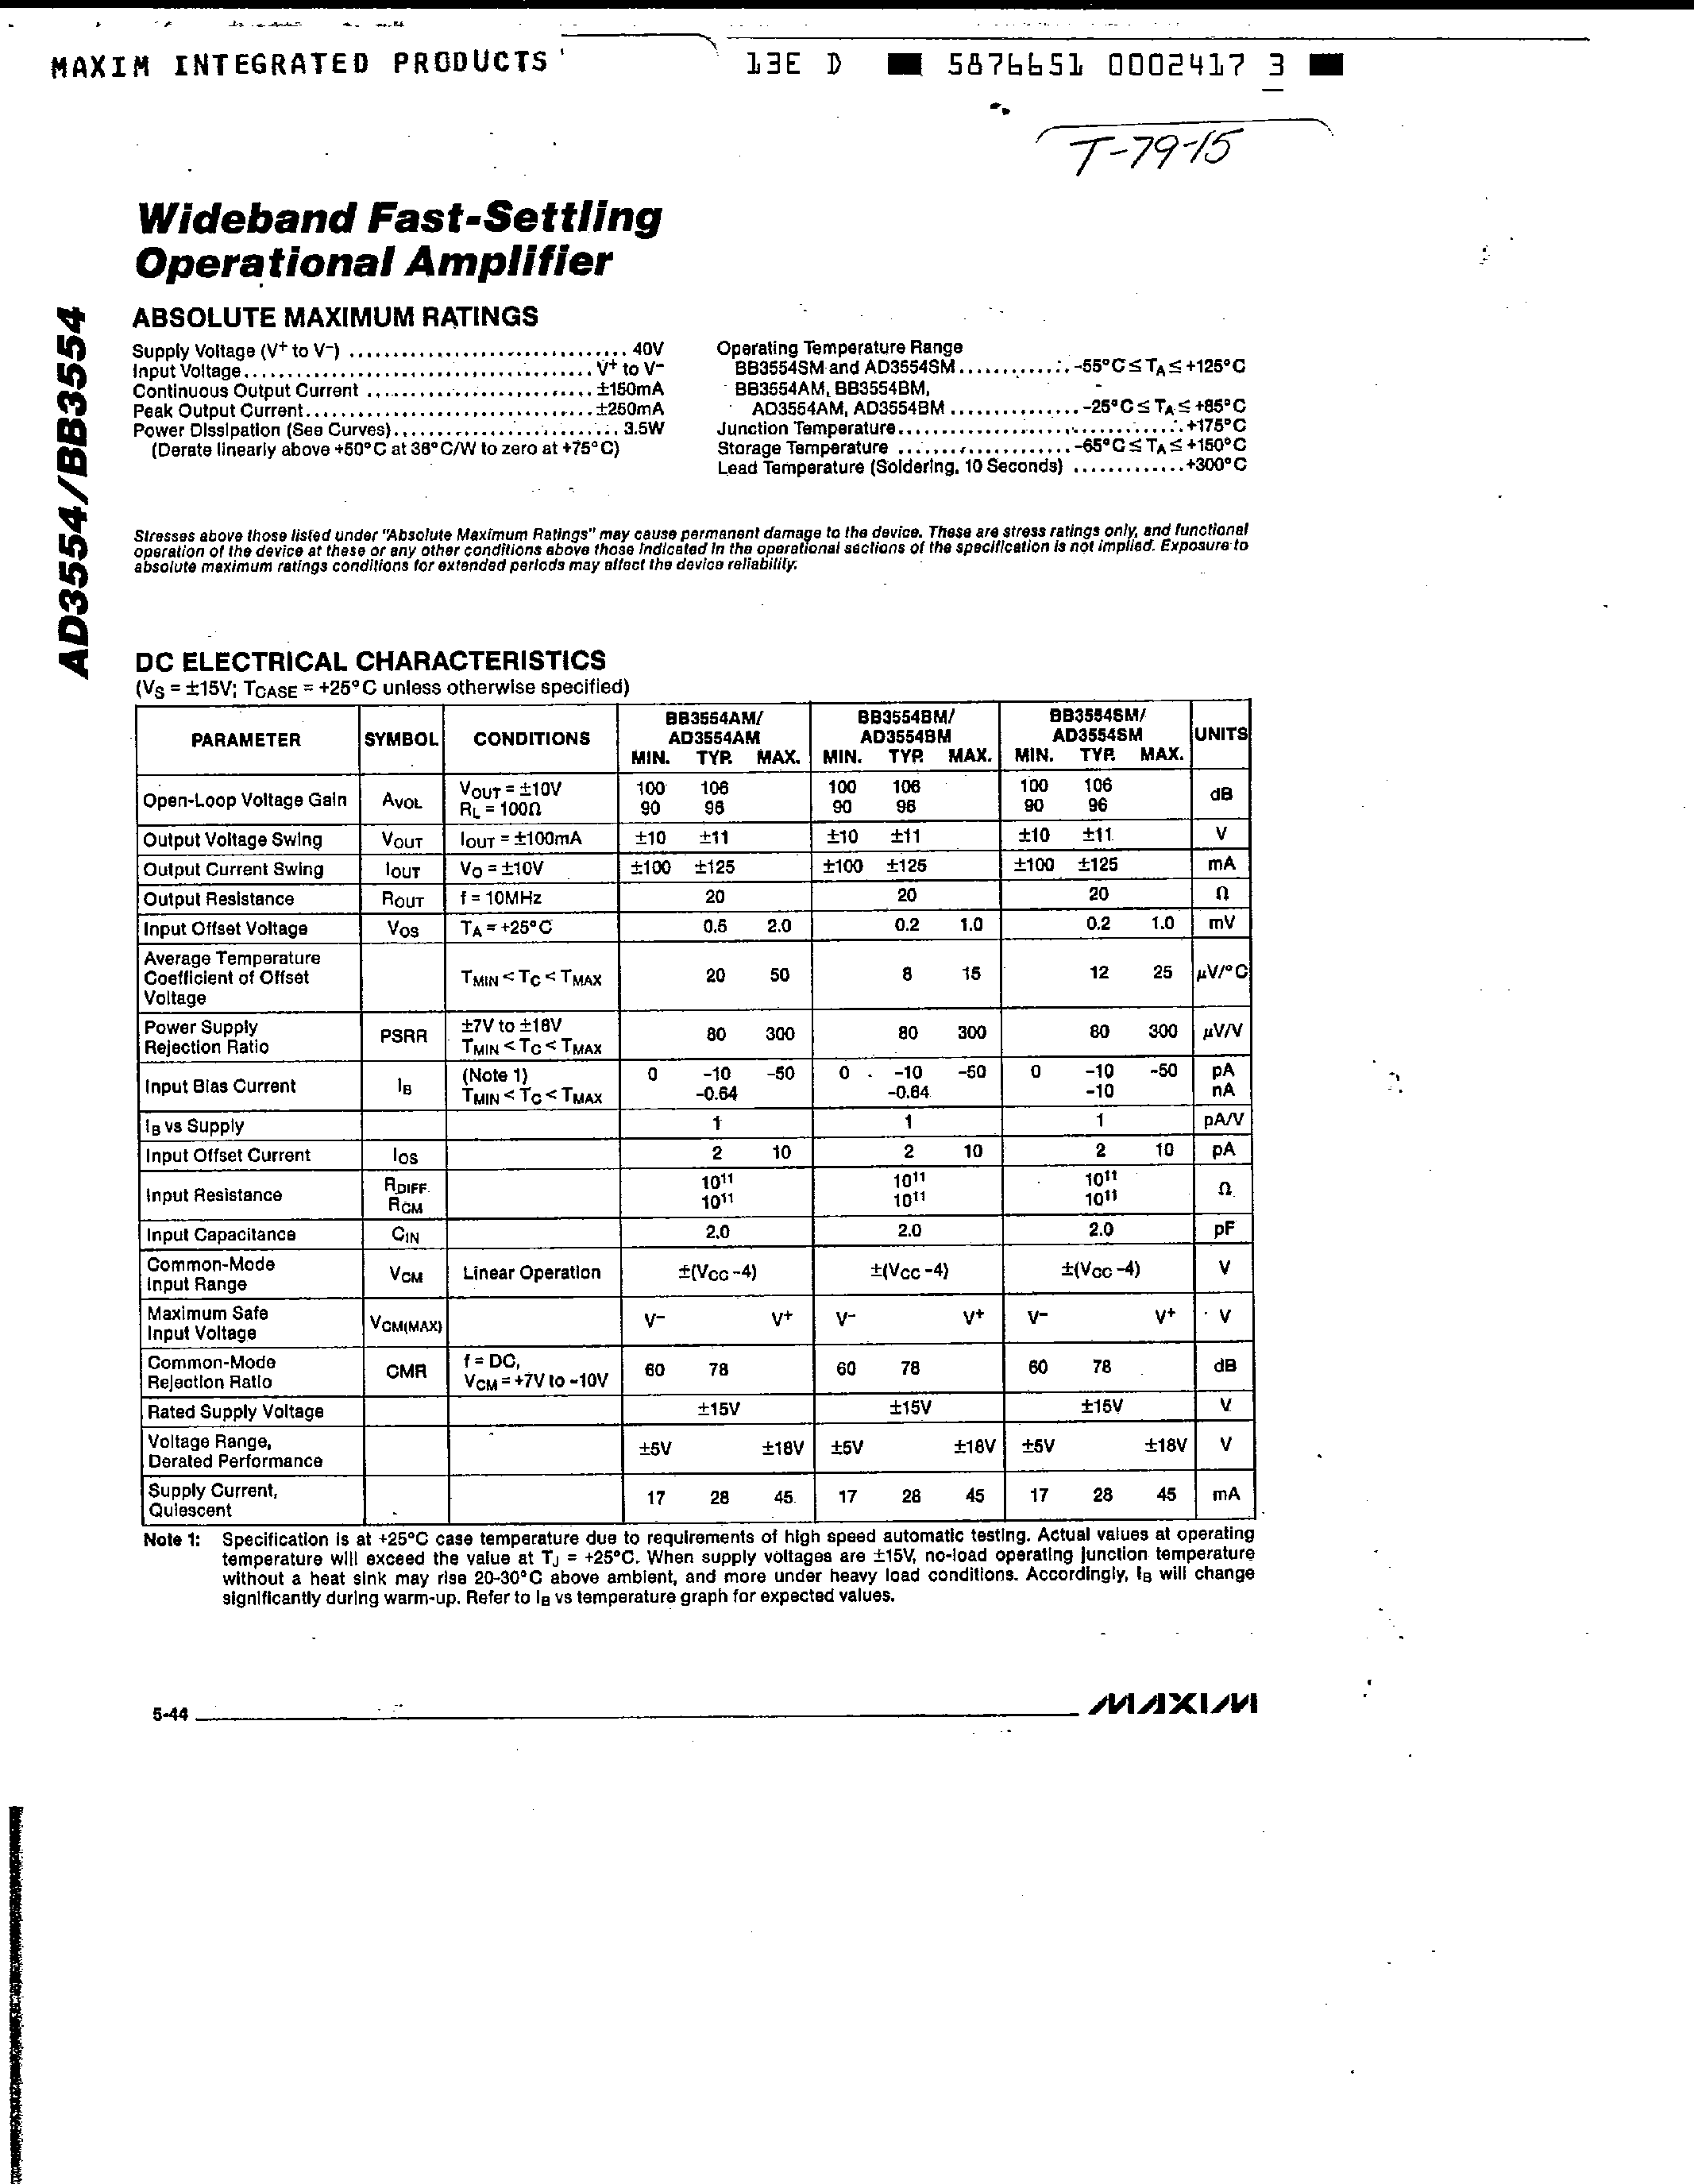 Datasheet AD3554 - Wideband Fast-Settling Operational Amplifier page 2